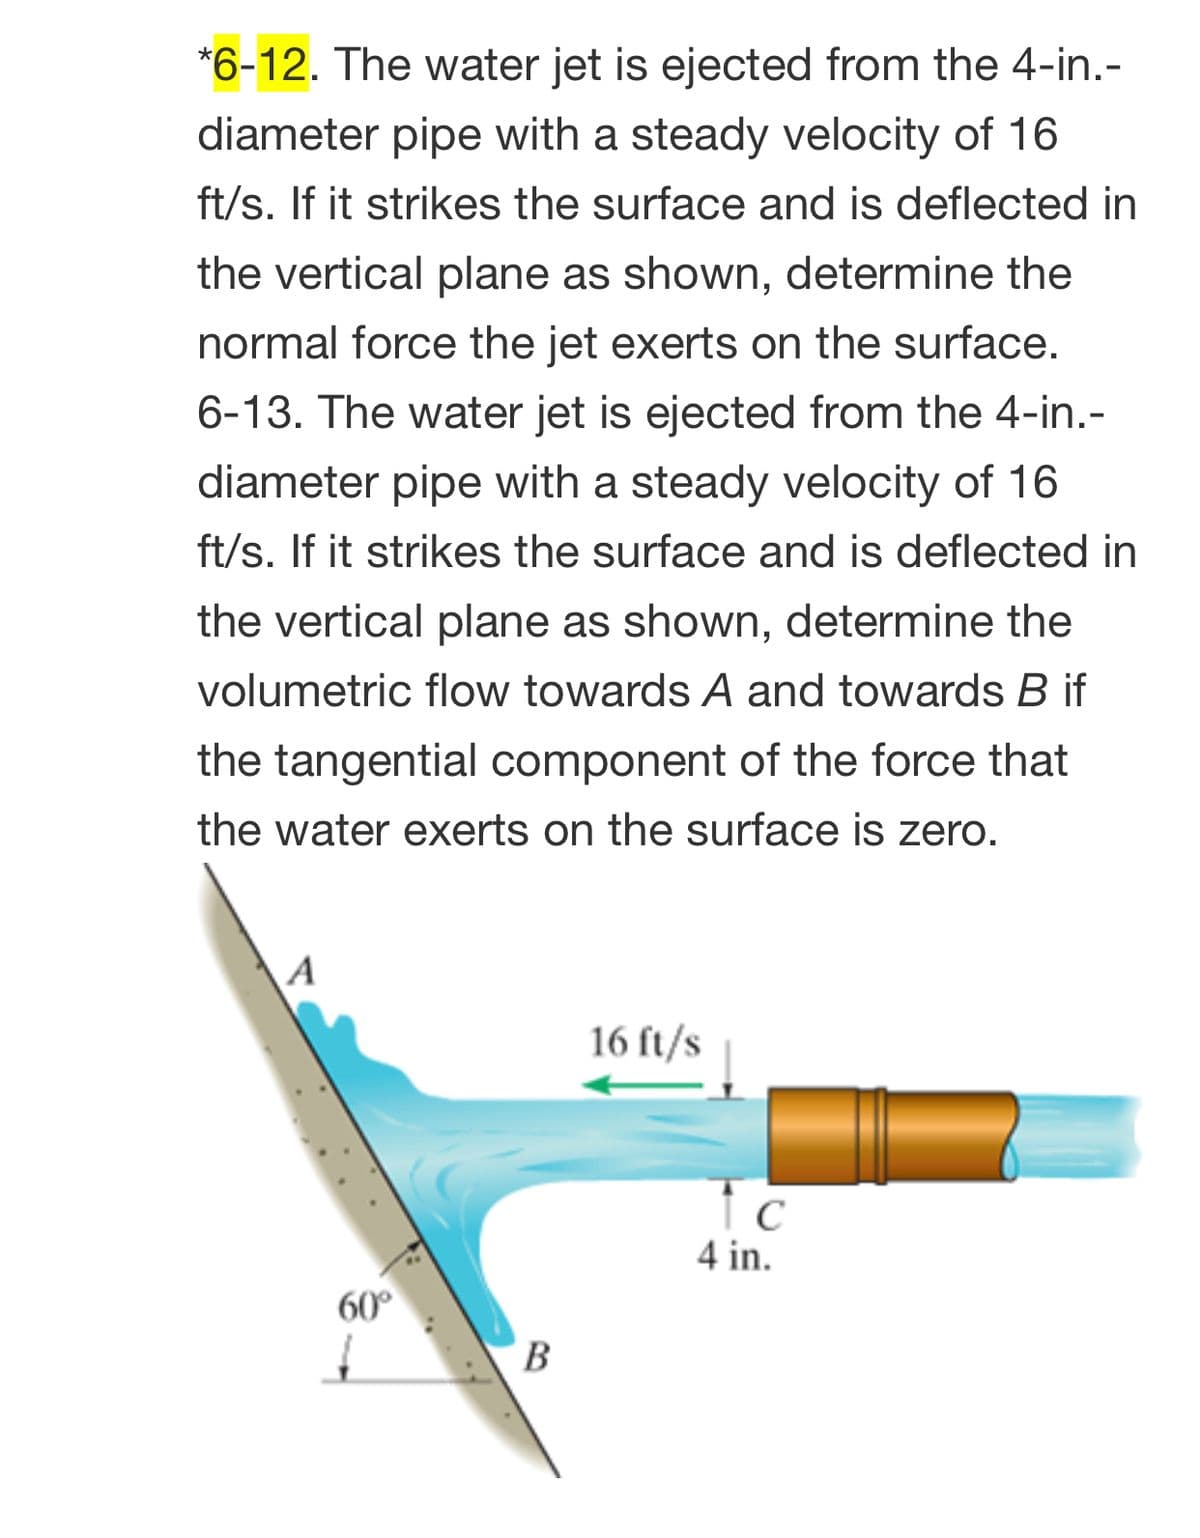 *6-12. The water jet is ejected from the 4-in.-
diameter pipe with a steady velocity of 16
ft/s. If it strikes the surface and is deflected in
the vertical plane as shown, determine the
normal force the jet exerts on the surface.
6-13. The water jet is ejected from the 4-in.-
diameter pipe with a steady velocity of 16
ft/s. If it strikes the surface and is deflected in
the vertical plane as shown, determine the
volumetric flow towards A and towards B if
the tangential component of the force that
the water exerts on the surface is zero.
A
16 ft/s
Tc
4 in.
60°
В
